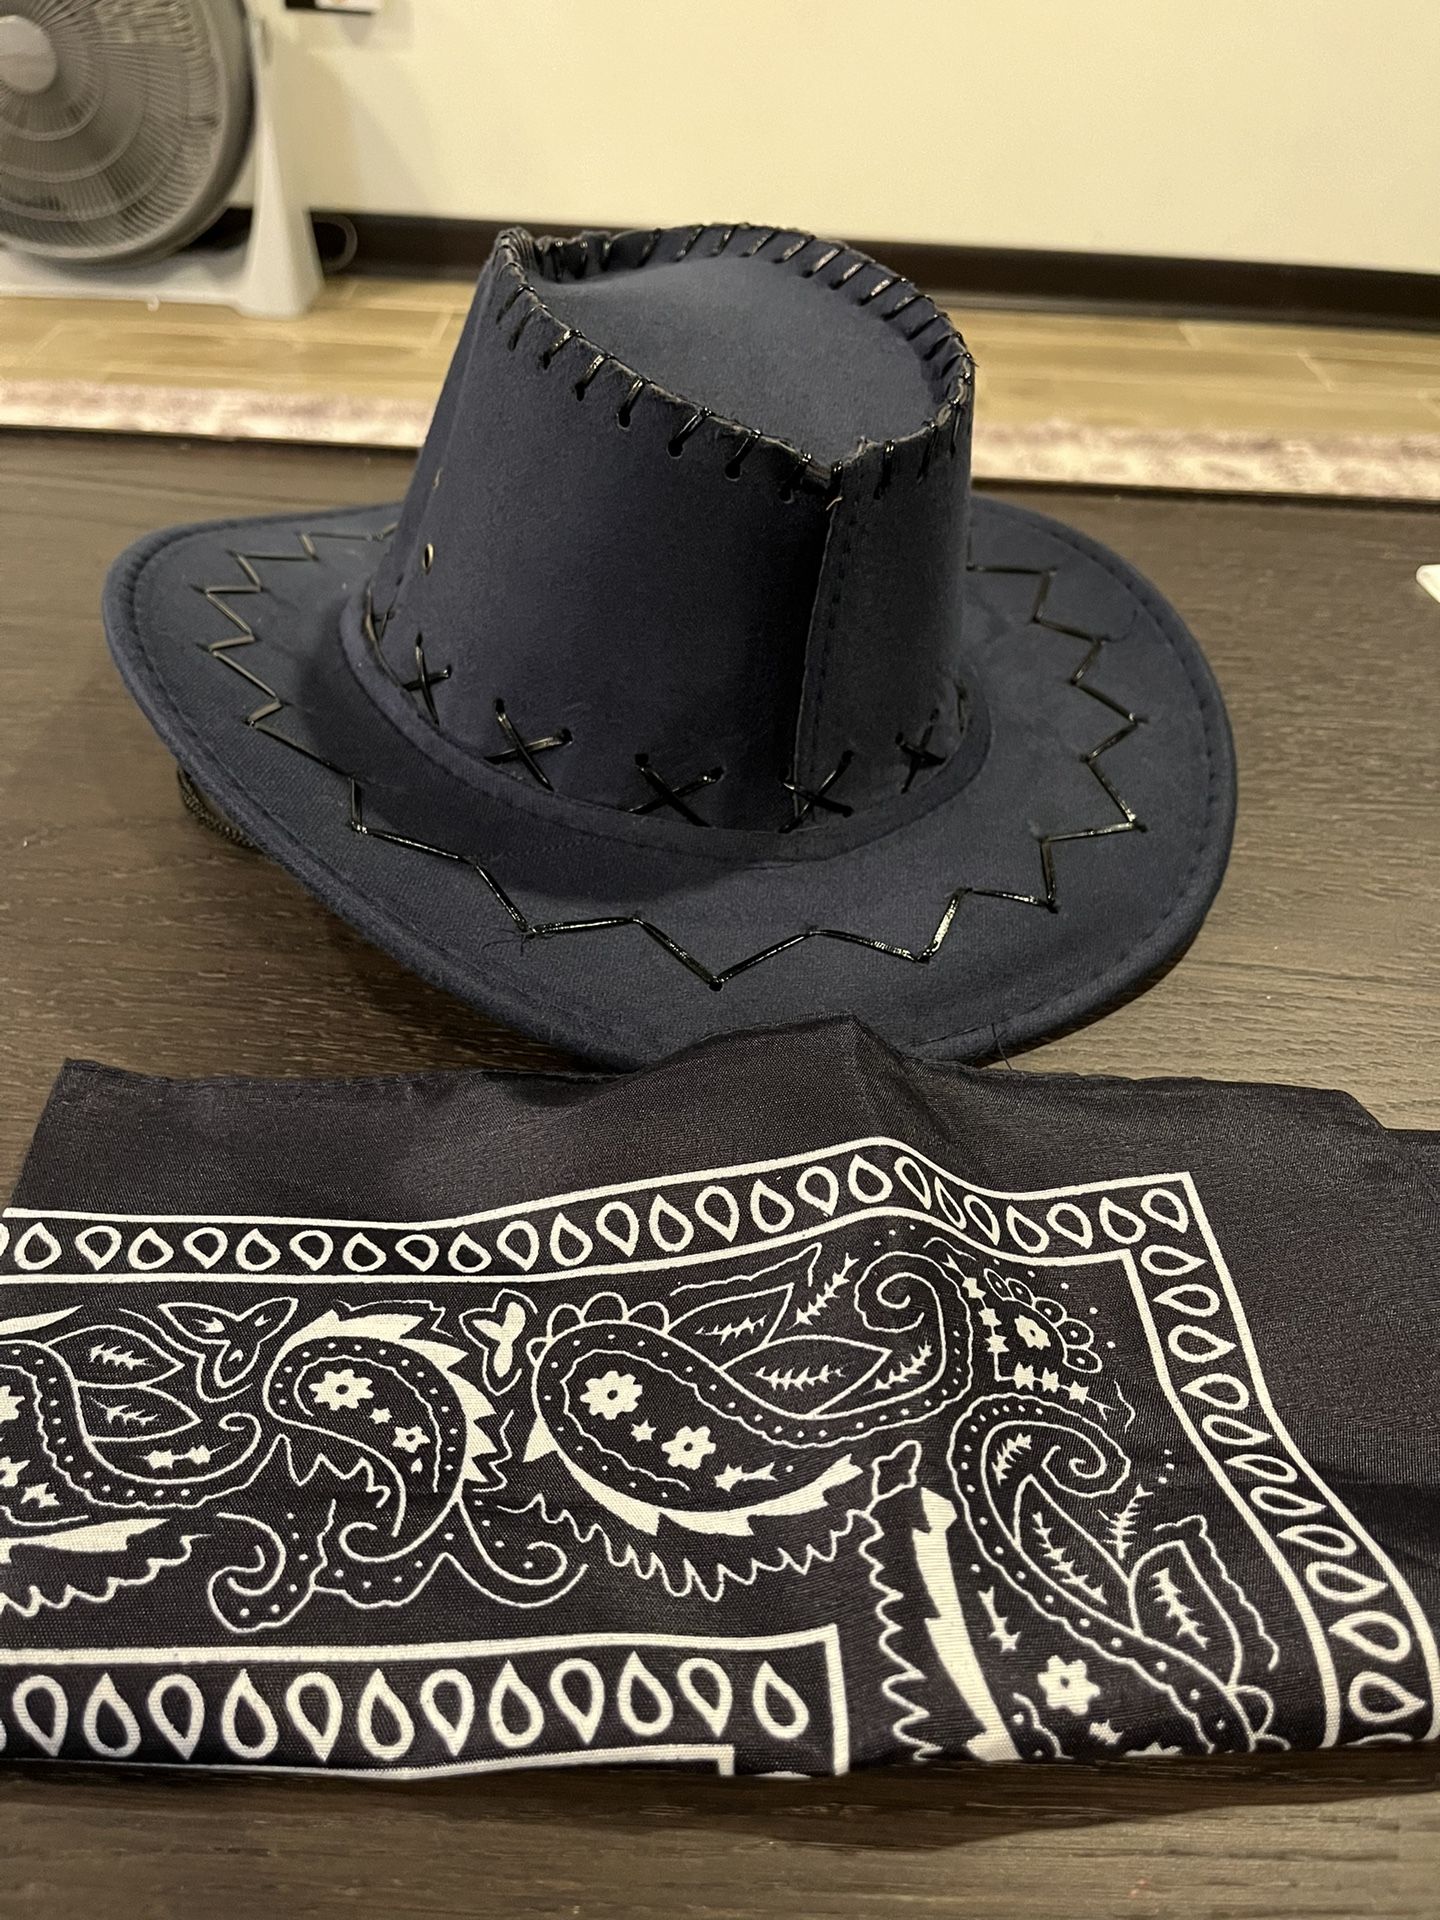 New Kids Cowboy Hat With Scarf $7 Each Set